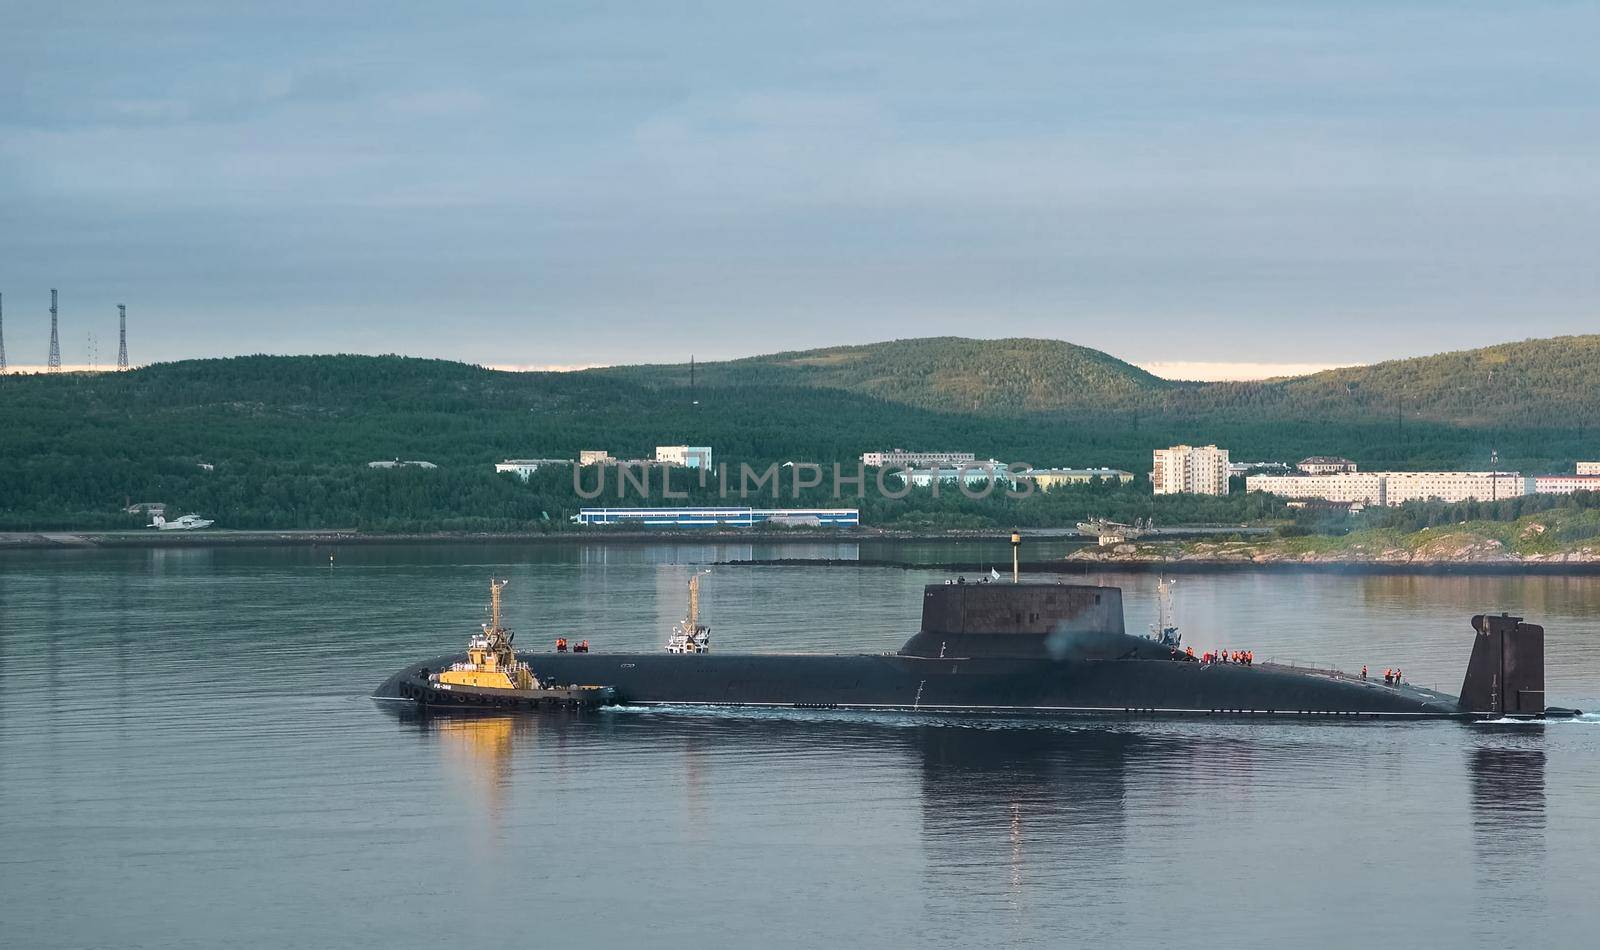 Russian nuclear submarine by DePo